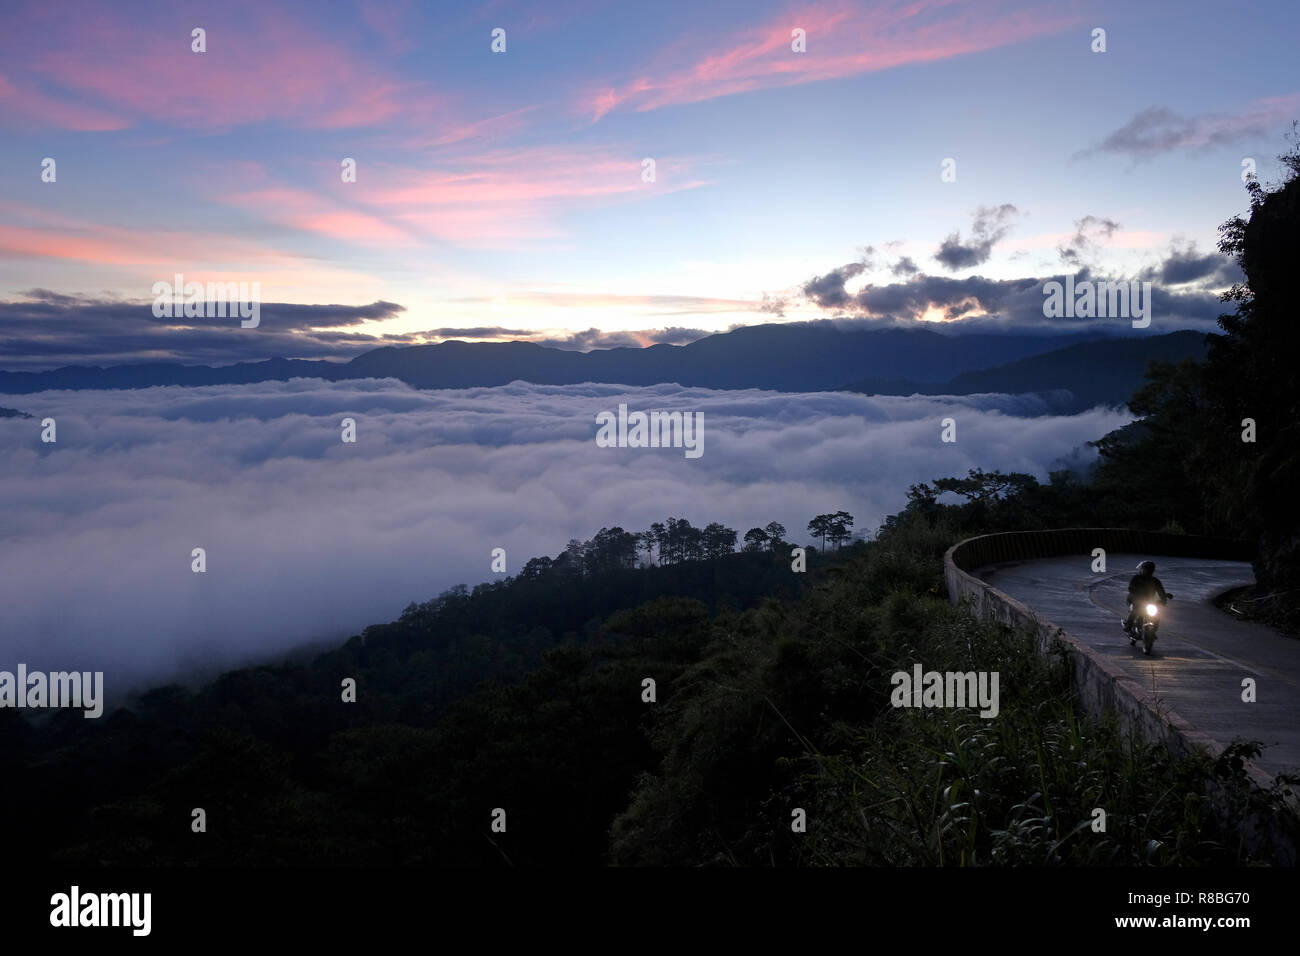 A thick blanket of fog rolls over the Cordillera Central or Cordillera Mountain Range as viewed from Halsema Highway on the way to the Municipality of Sagada in the island of Luzon, Philippines. Stock Photo